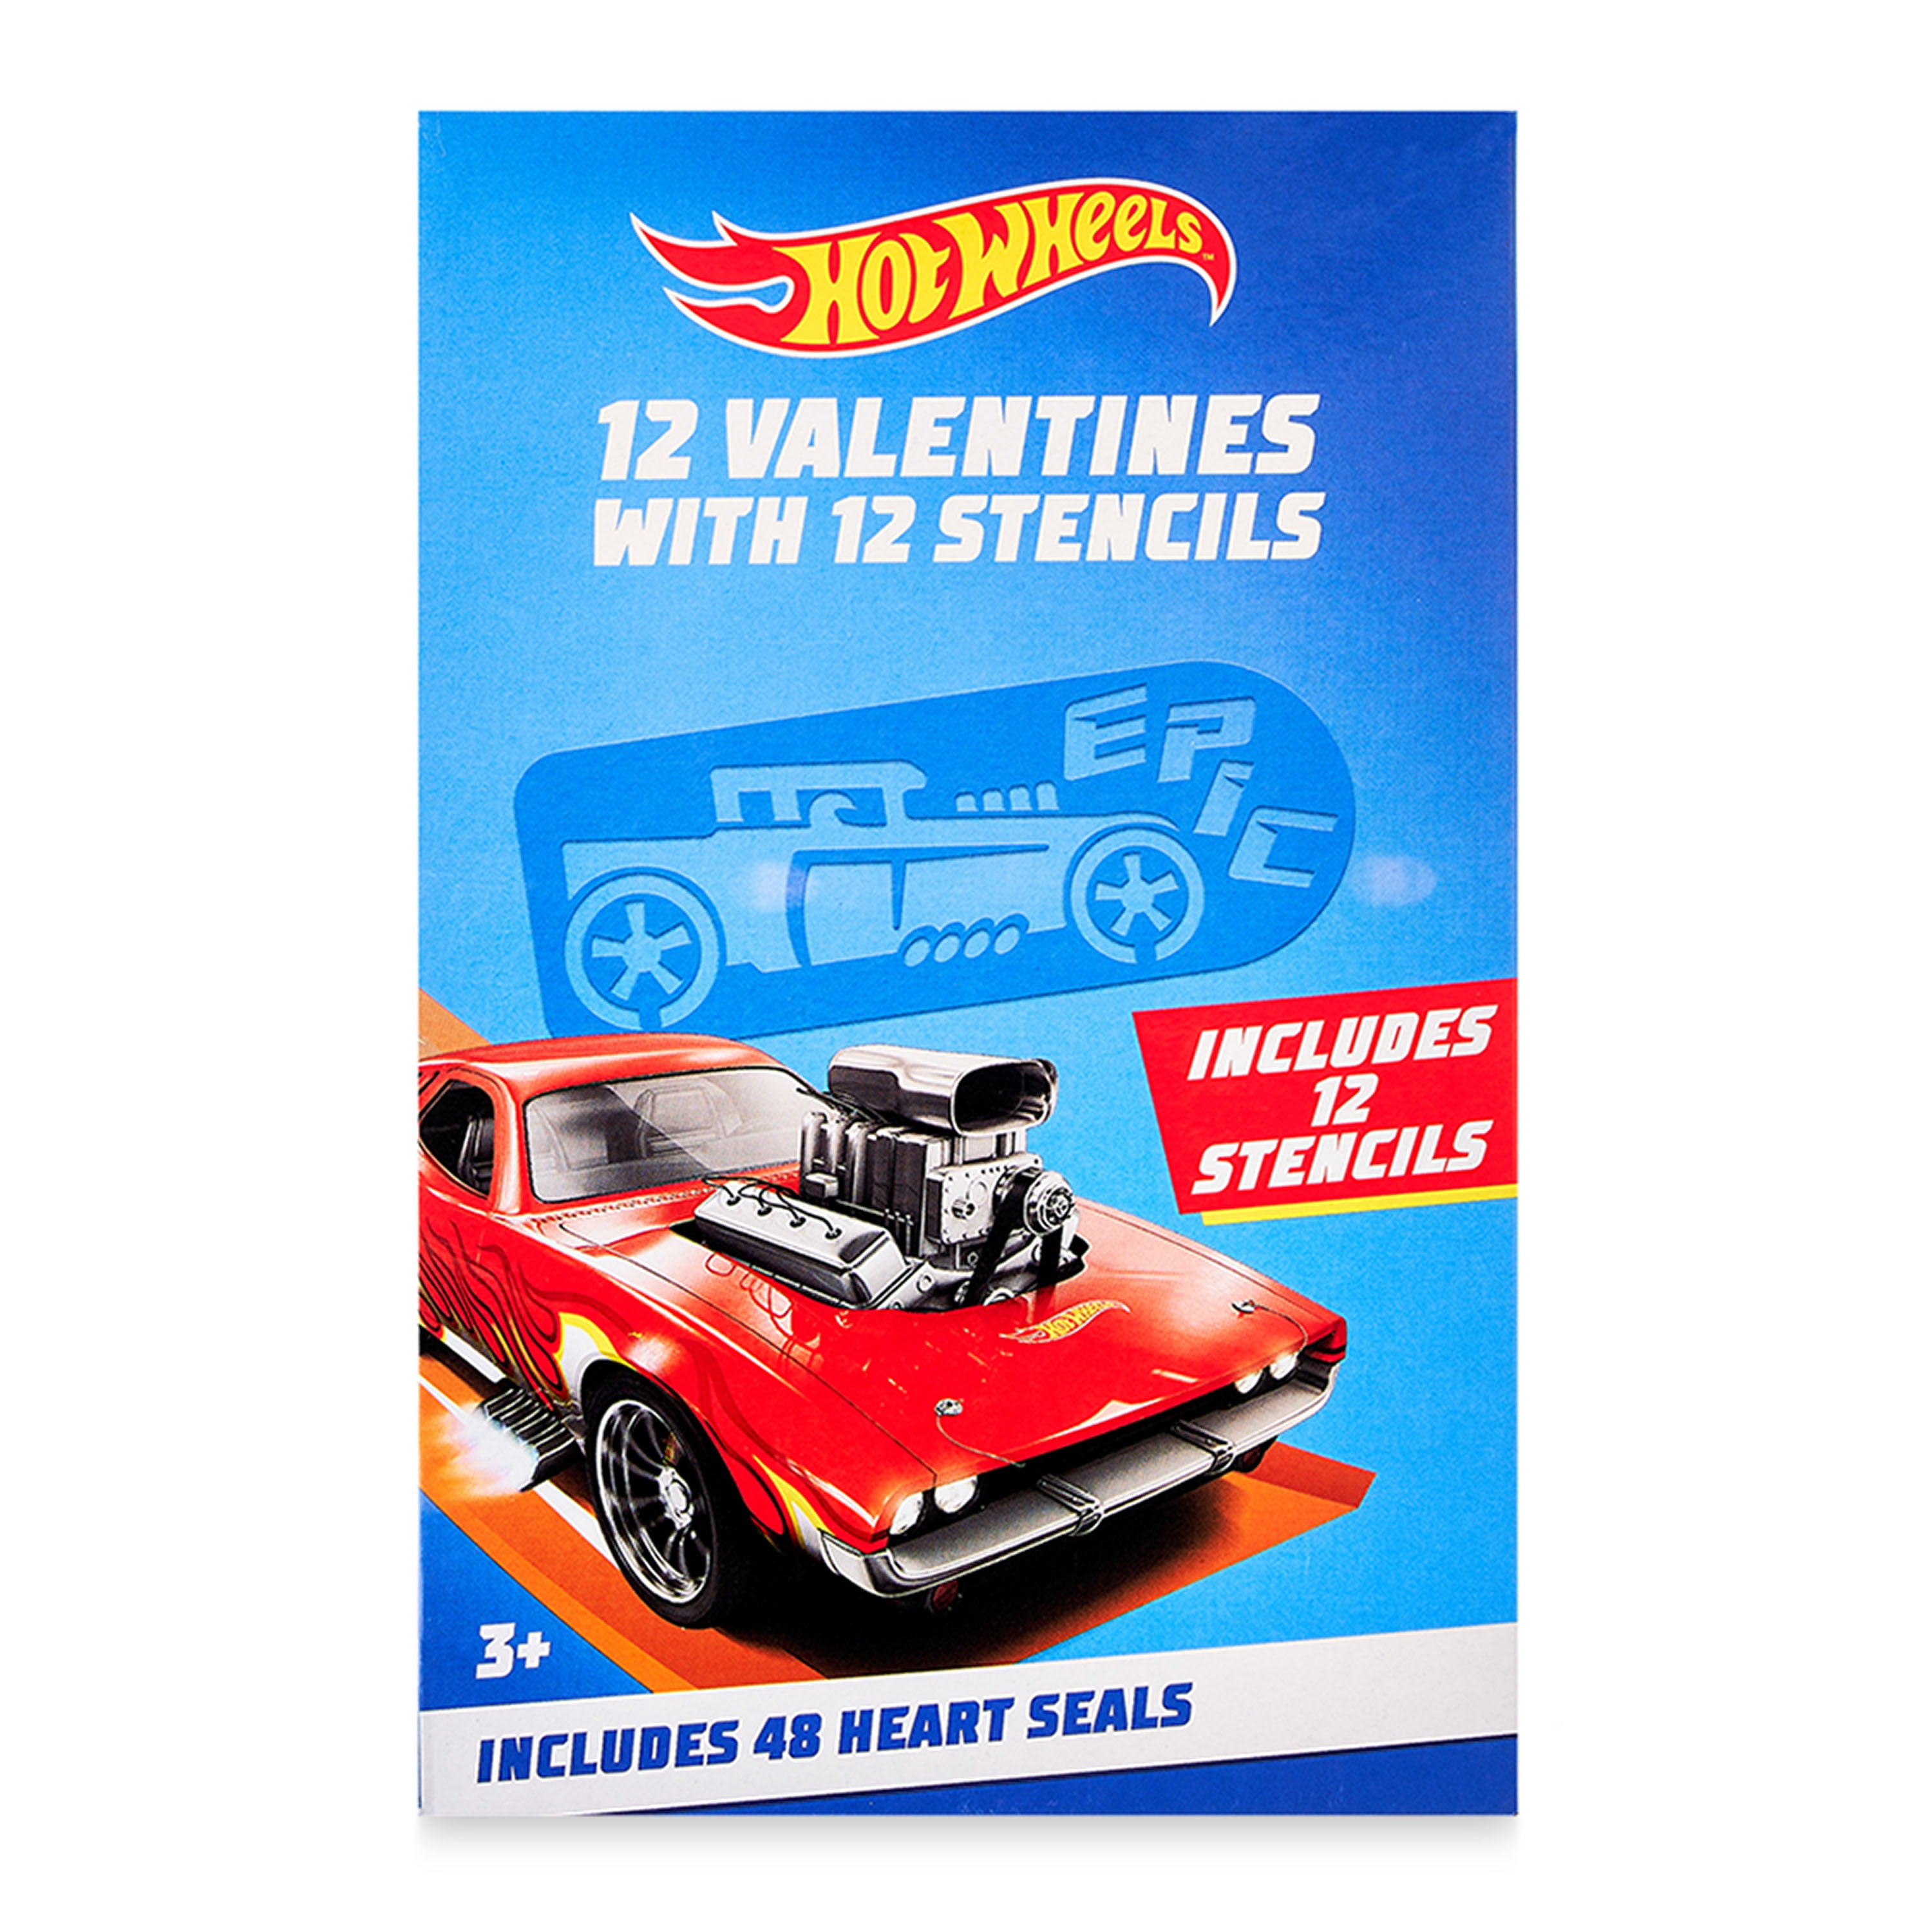 Way to Celebrate Hot Wheels Valentine Cards, Multi-Colored, Plastic Stencils, 16 Count